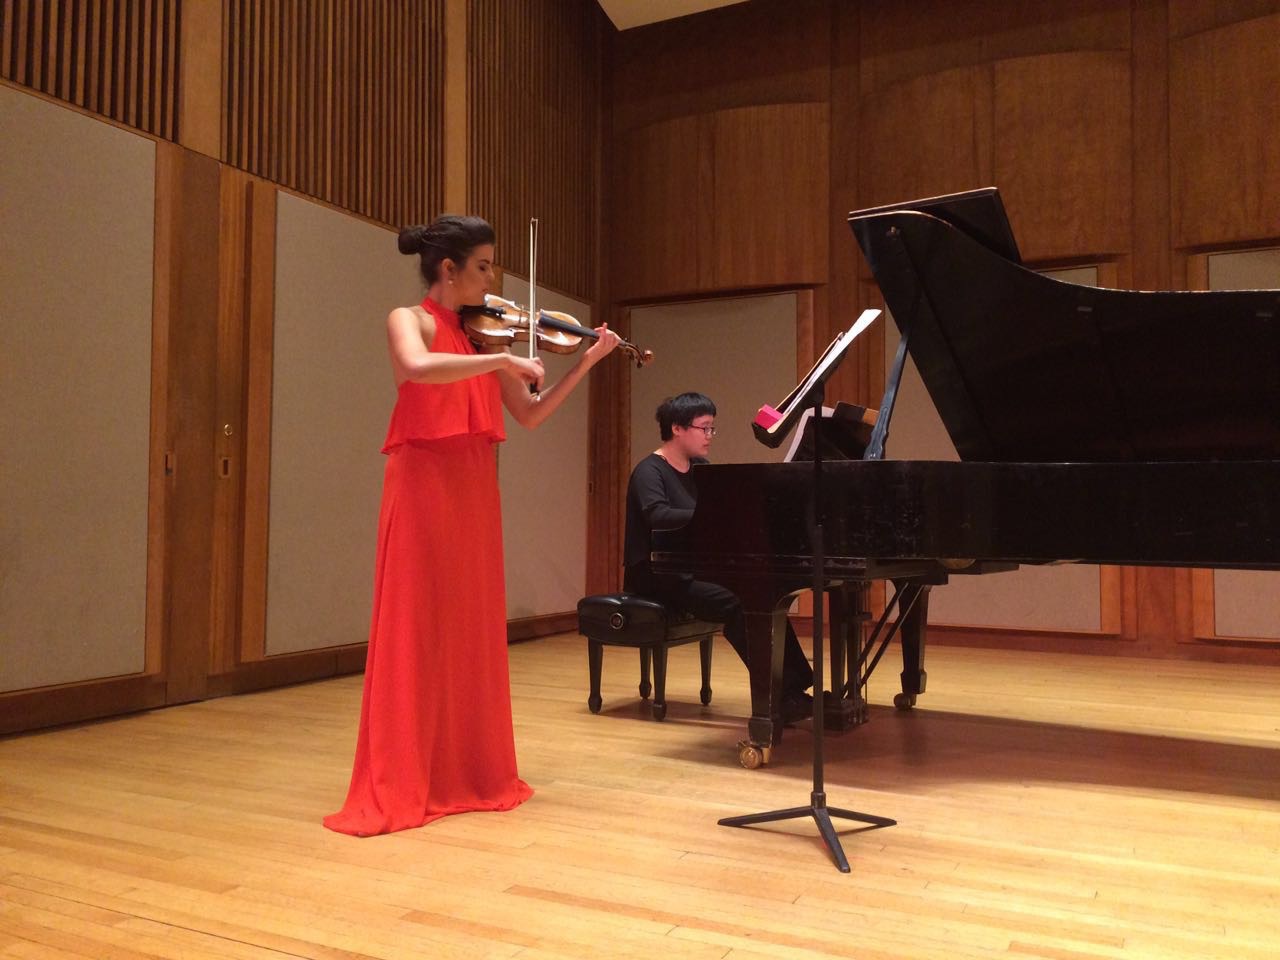 Julia Bomfim plays violin in Pickman Hall at Longy School of Music, with a collaborative pianist